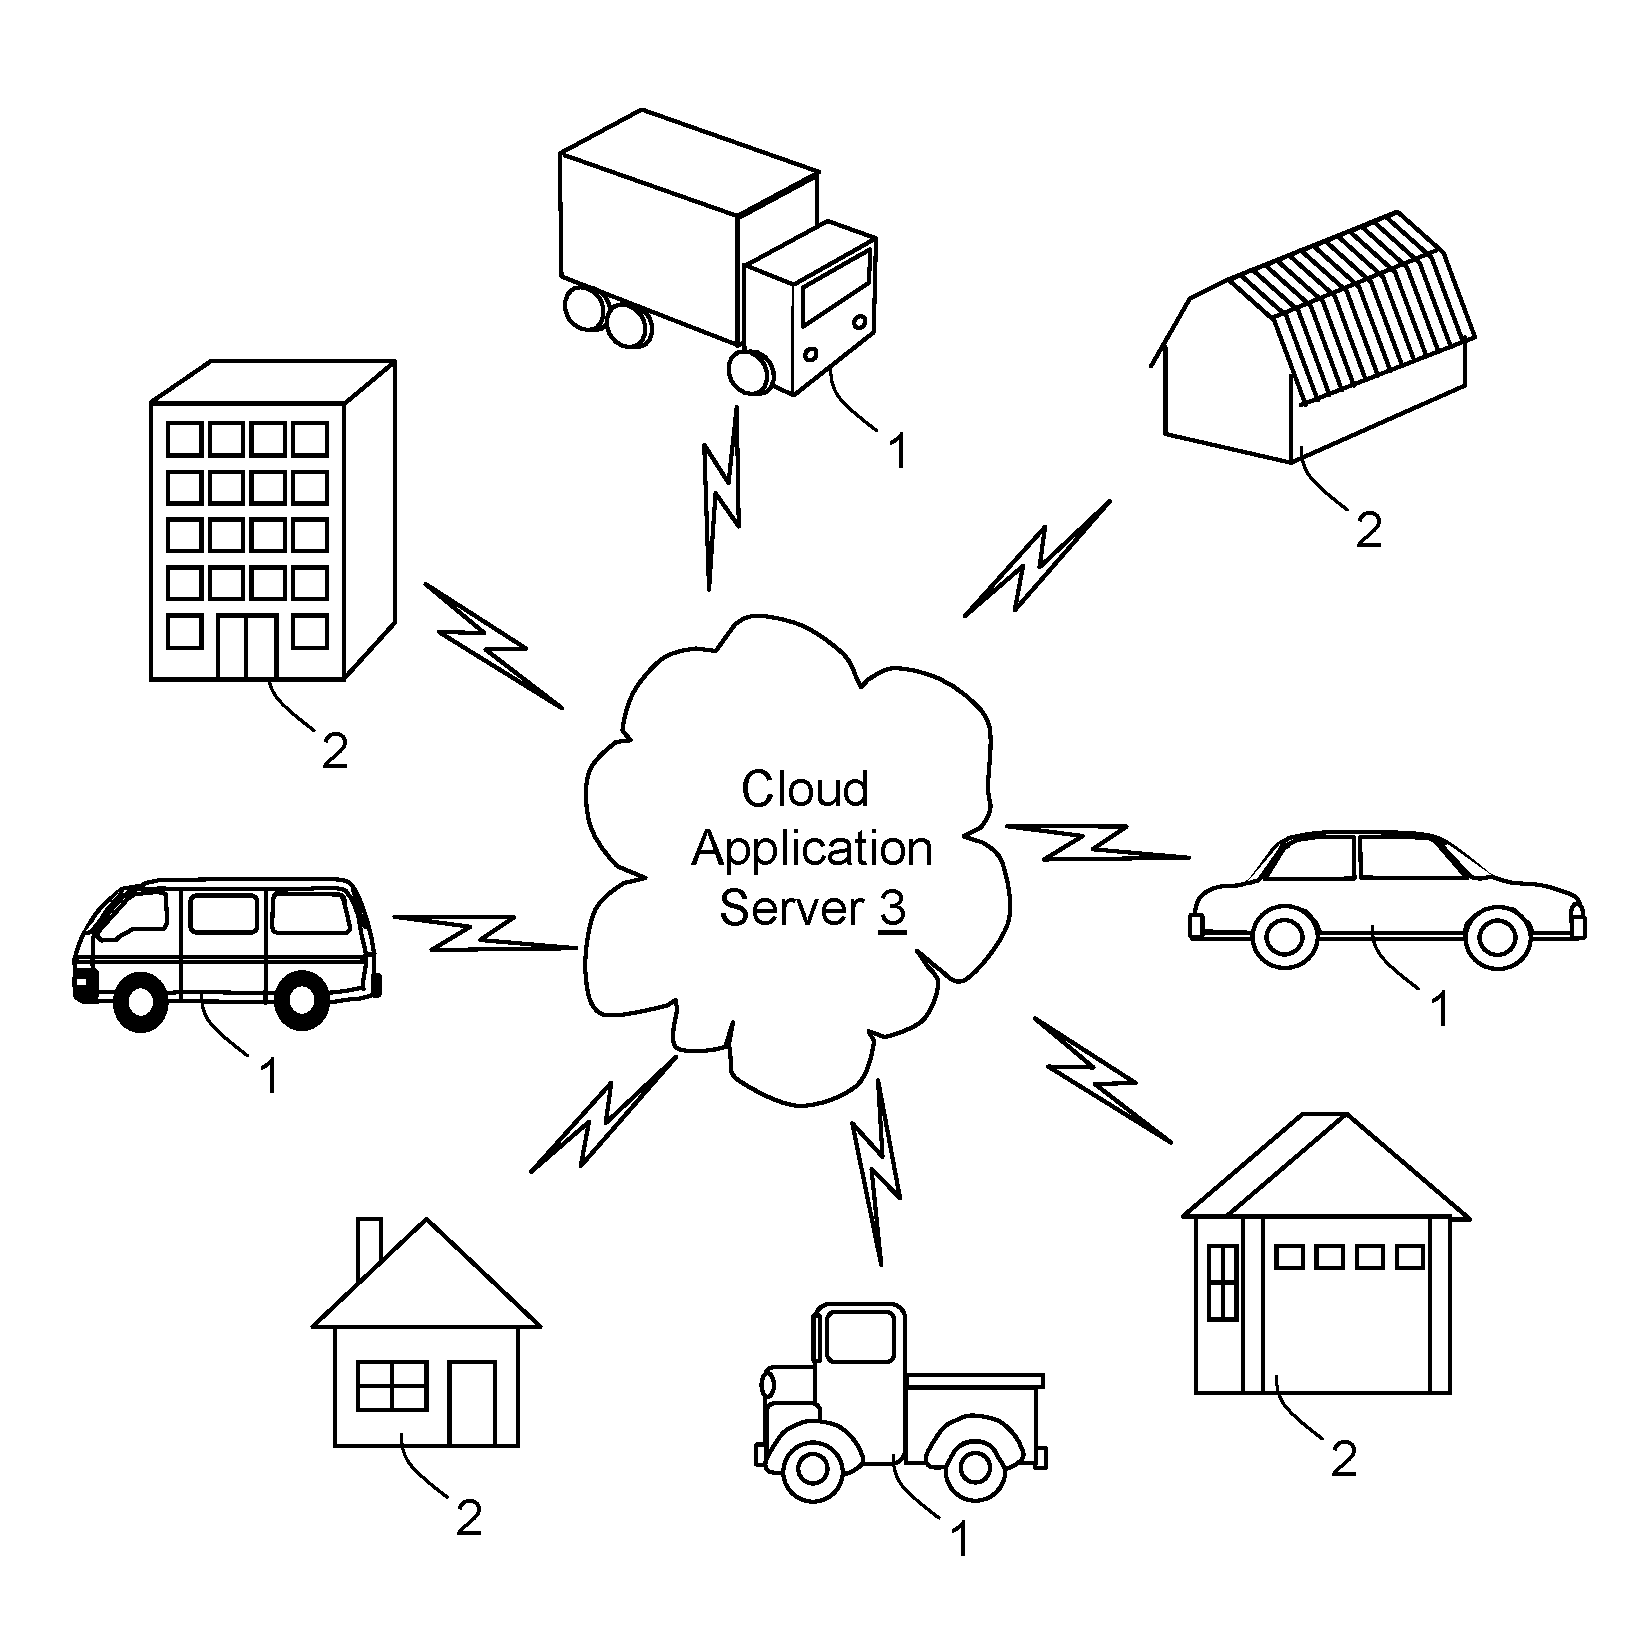 Transportation System Using Crowdsourced Warehouses and Storage Facilities